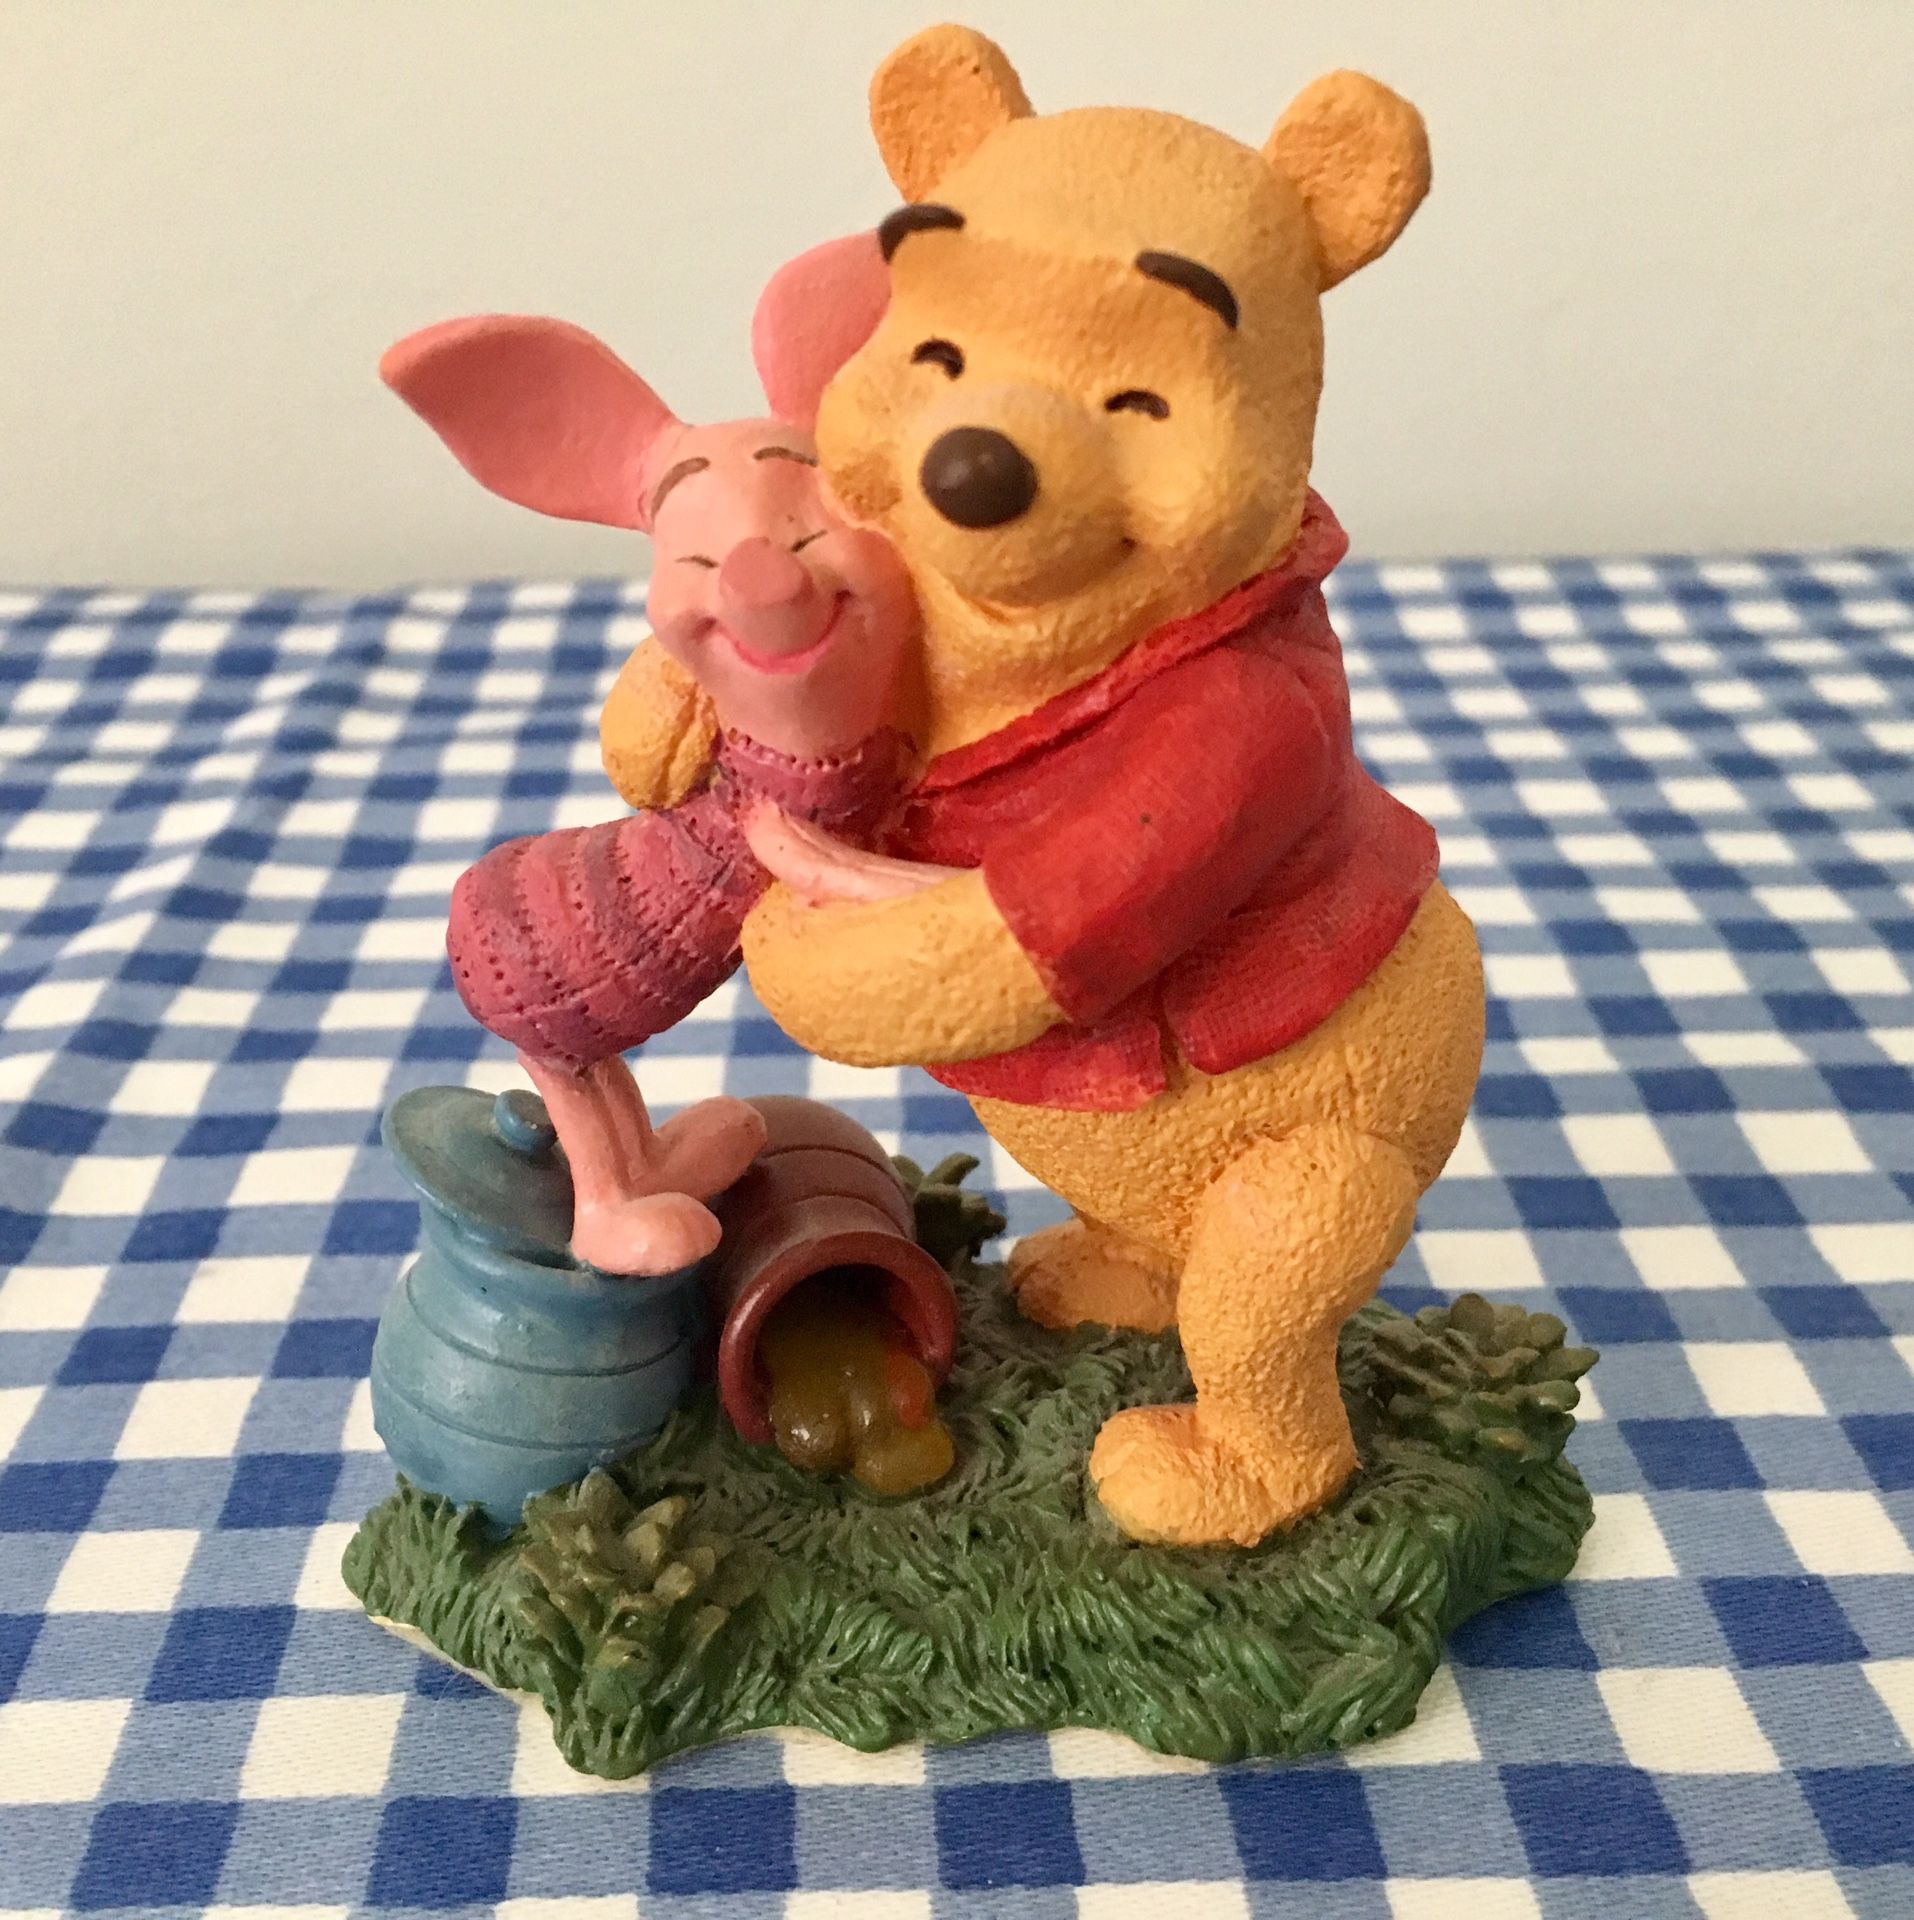 Disney Simply POOH and PIGLET Figurine - "Hugs are better than Honey"